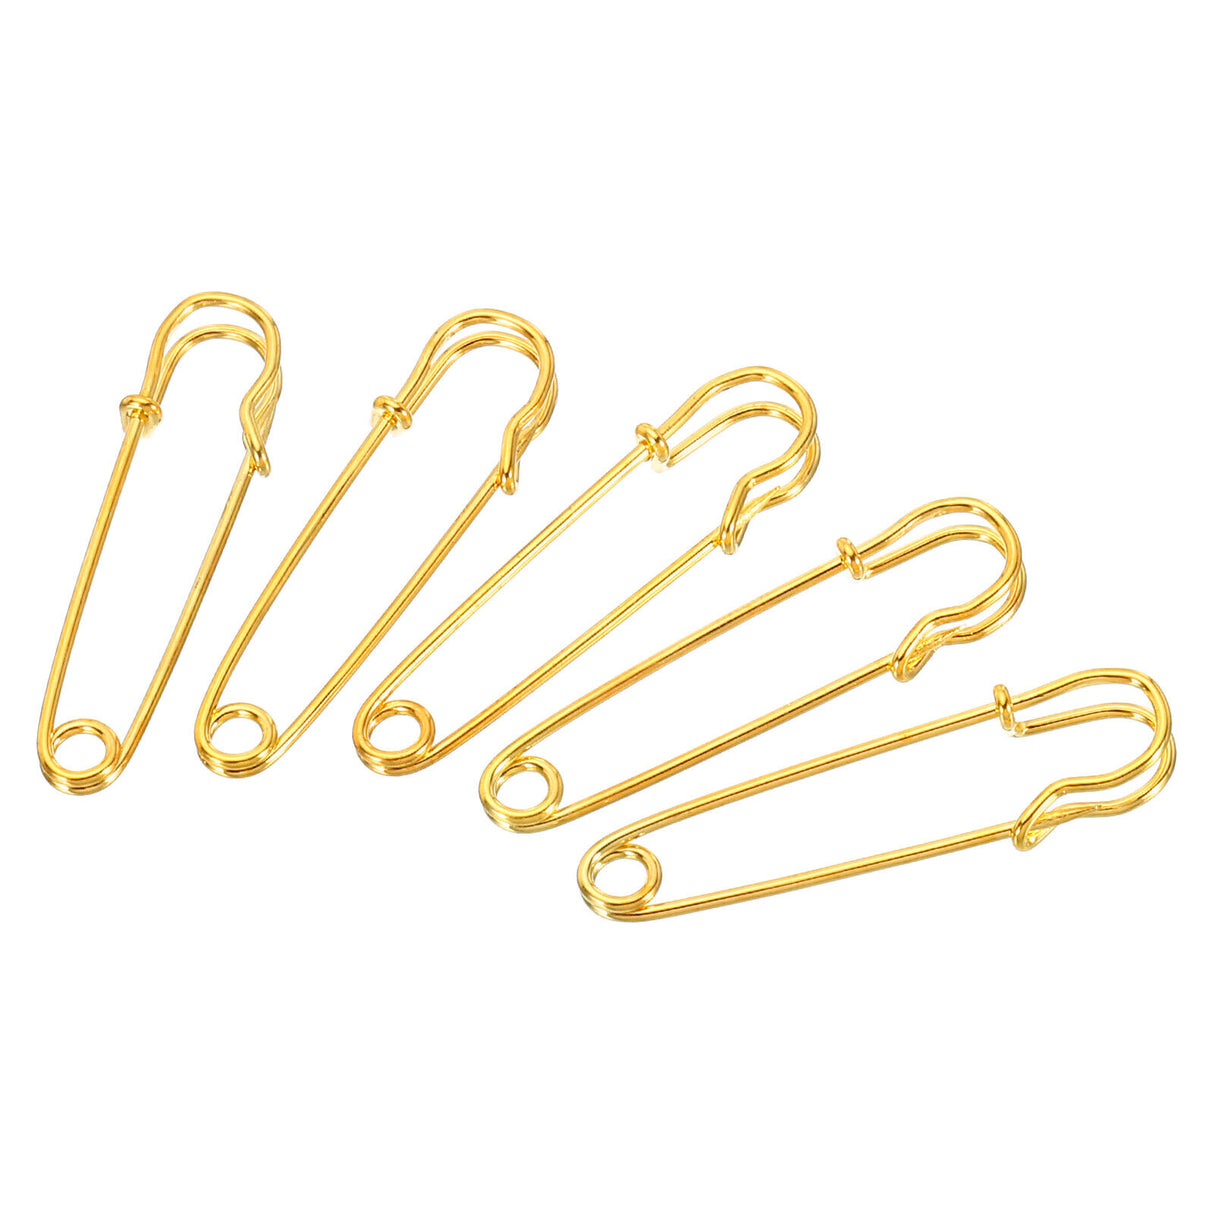 Safety Pins for NYPD badges Large Metal Pins Gold 2.99*0.63